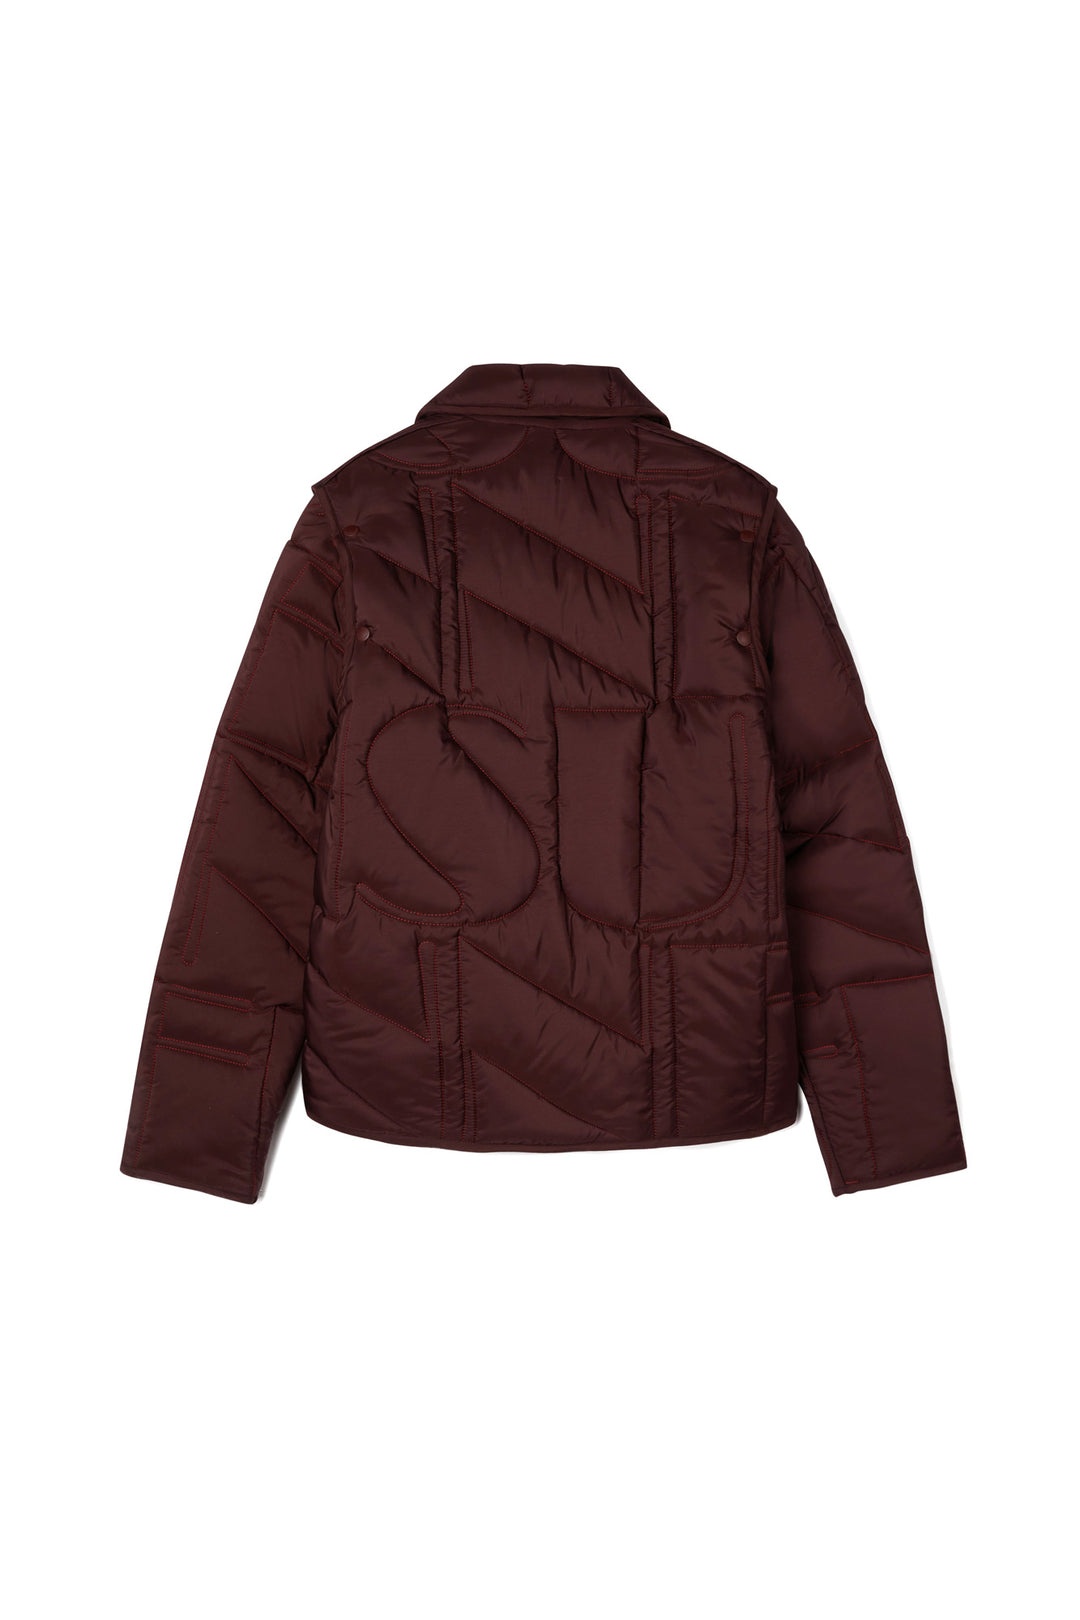 PADDED JACKET / maroon / embroidered allover logo - 2